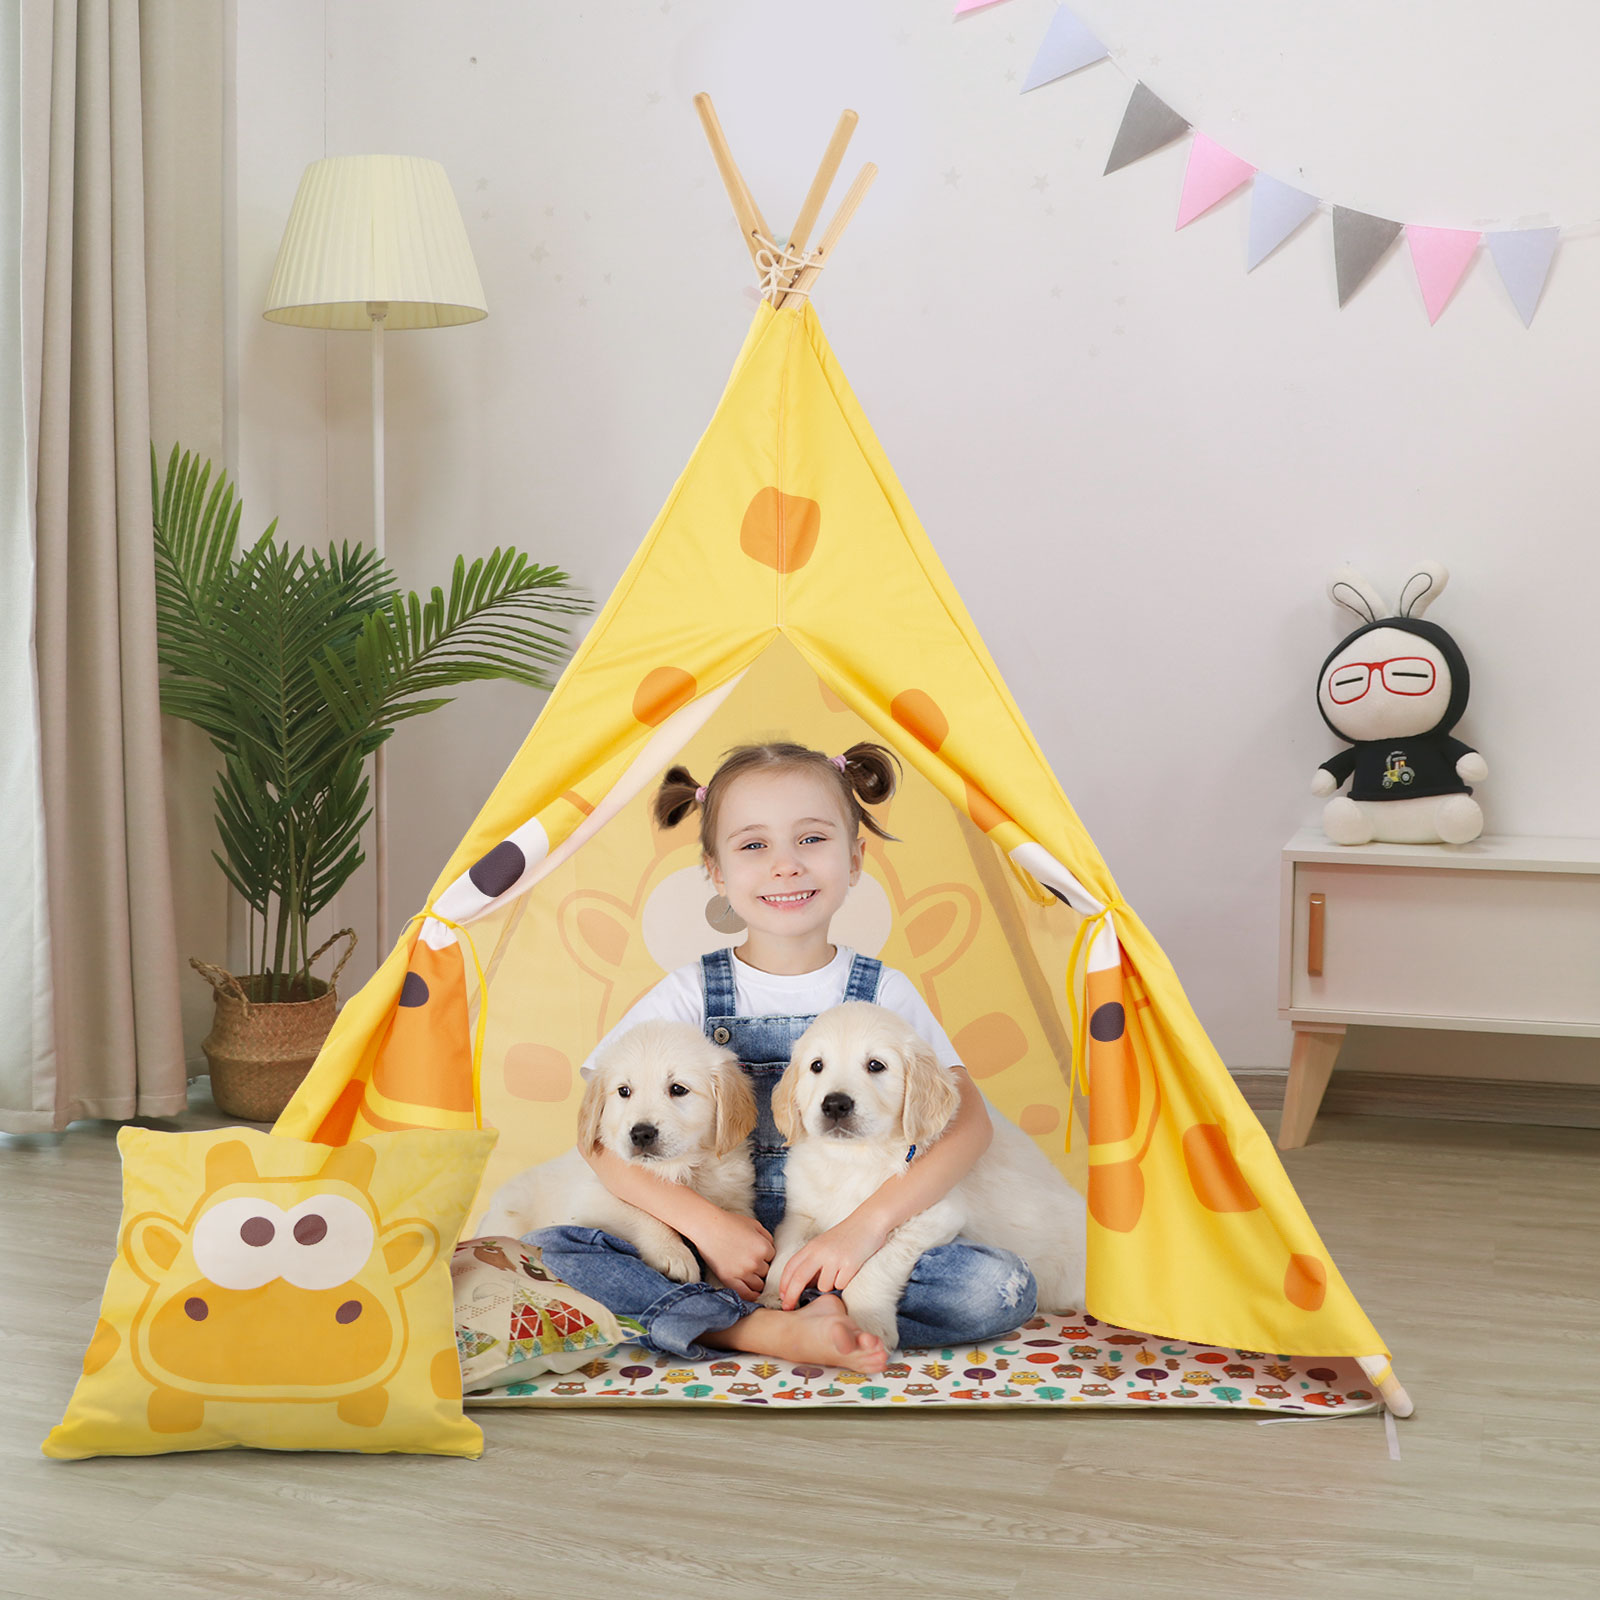 Giraffe Children’s Tent Indian Indoor Yellow Boys Girls Play House Baby Dollhouse Tent (ZP0184) Featured Image